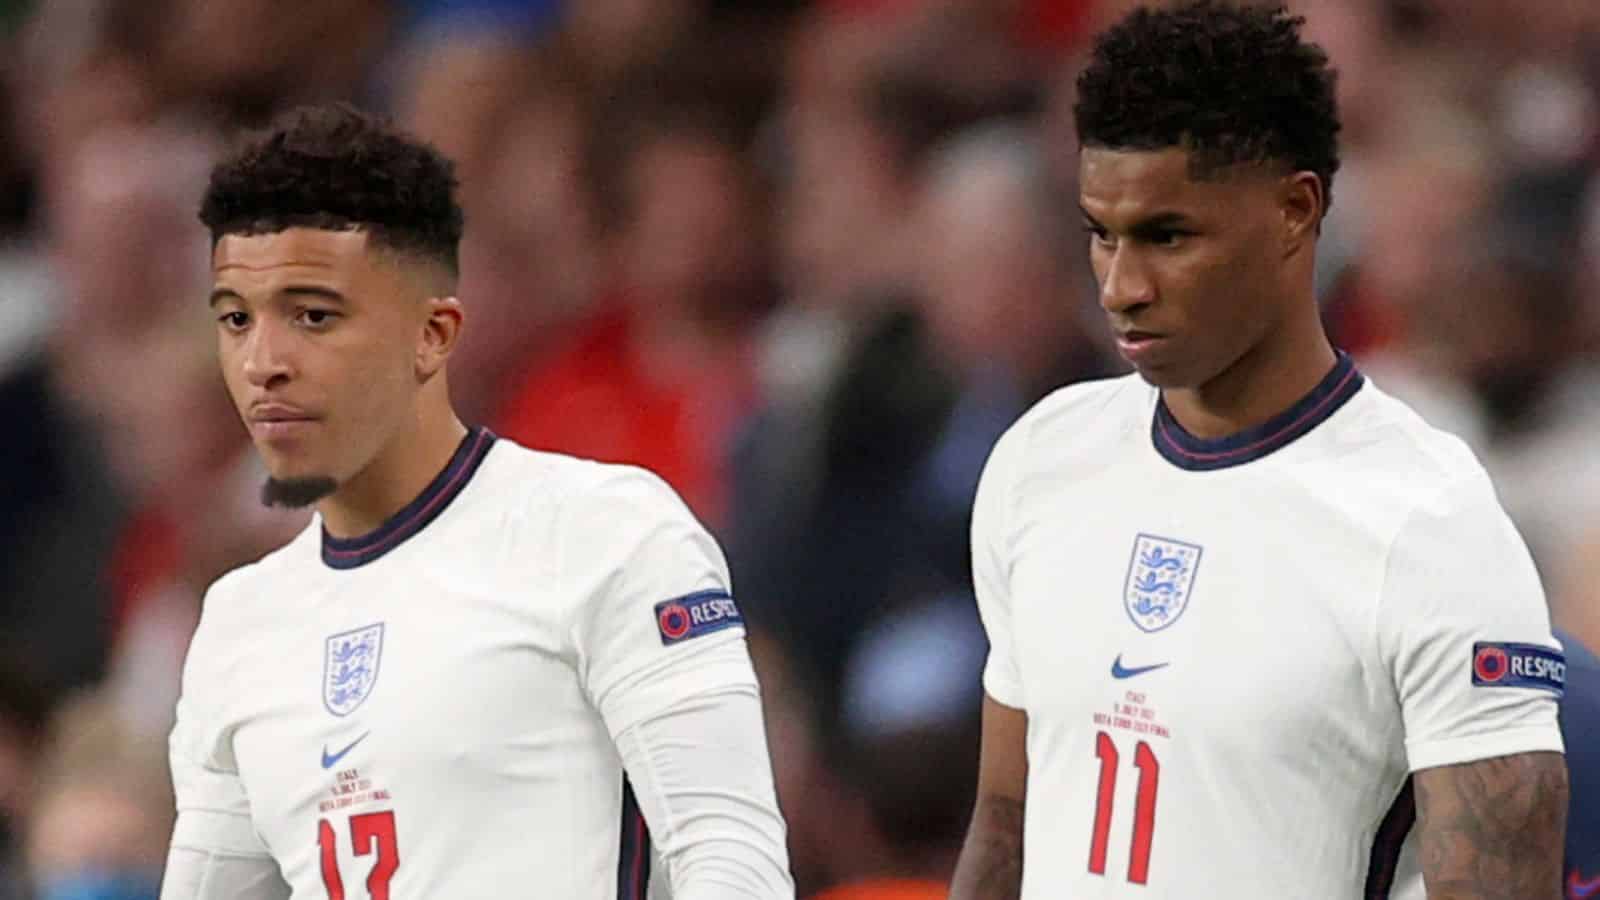 Jadon Sancho and Marcus Rashford were targeted with racist abuse on social media after England's Euro 2020 final defeat